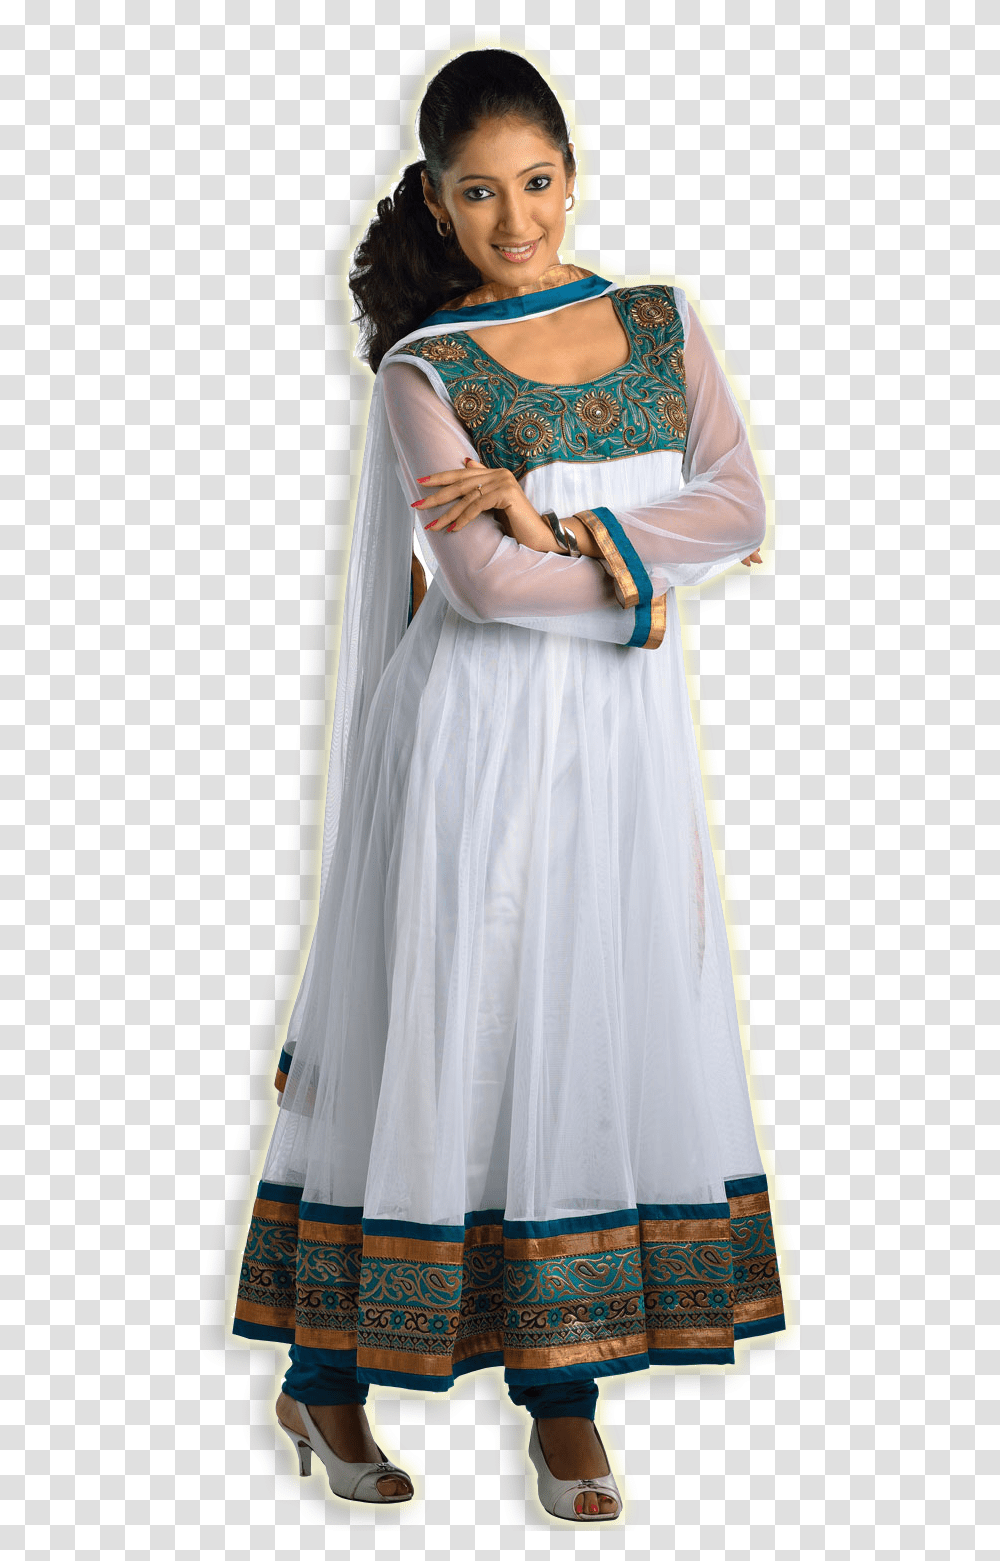 Ladies Dress Images, Evening Dress, Robe, Gown Transparent Png